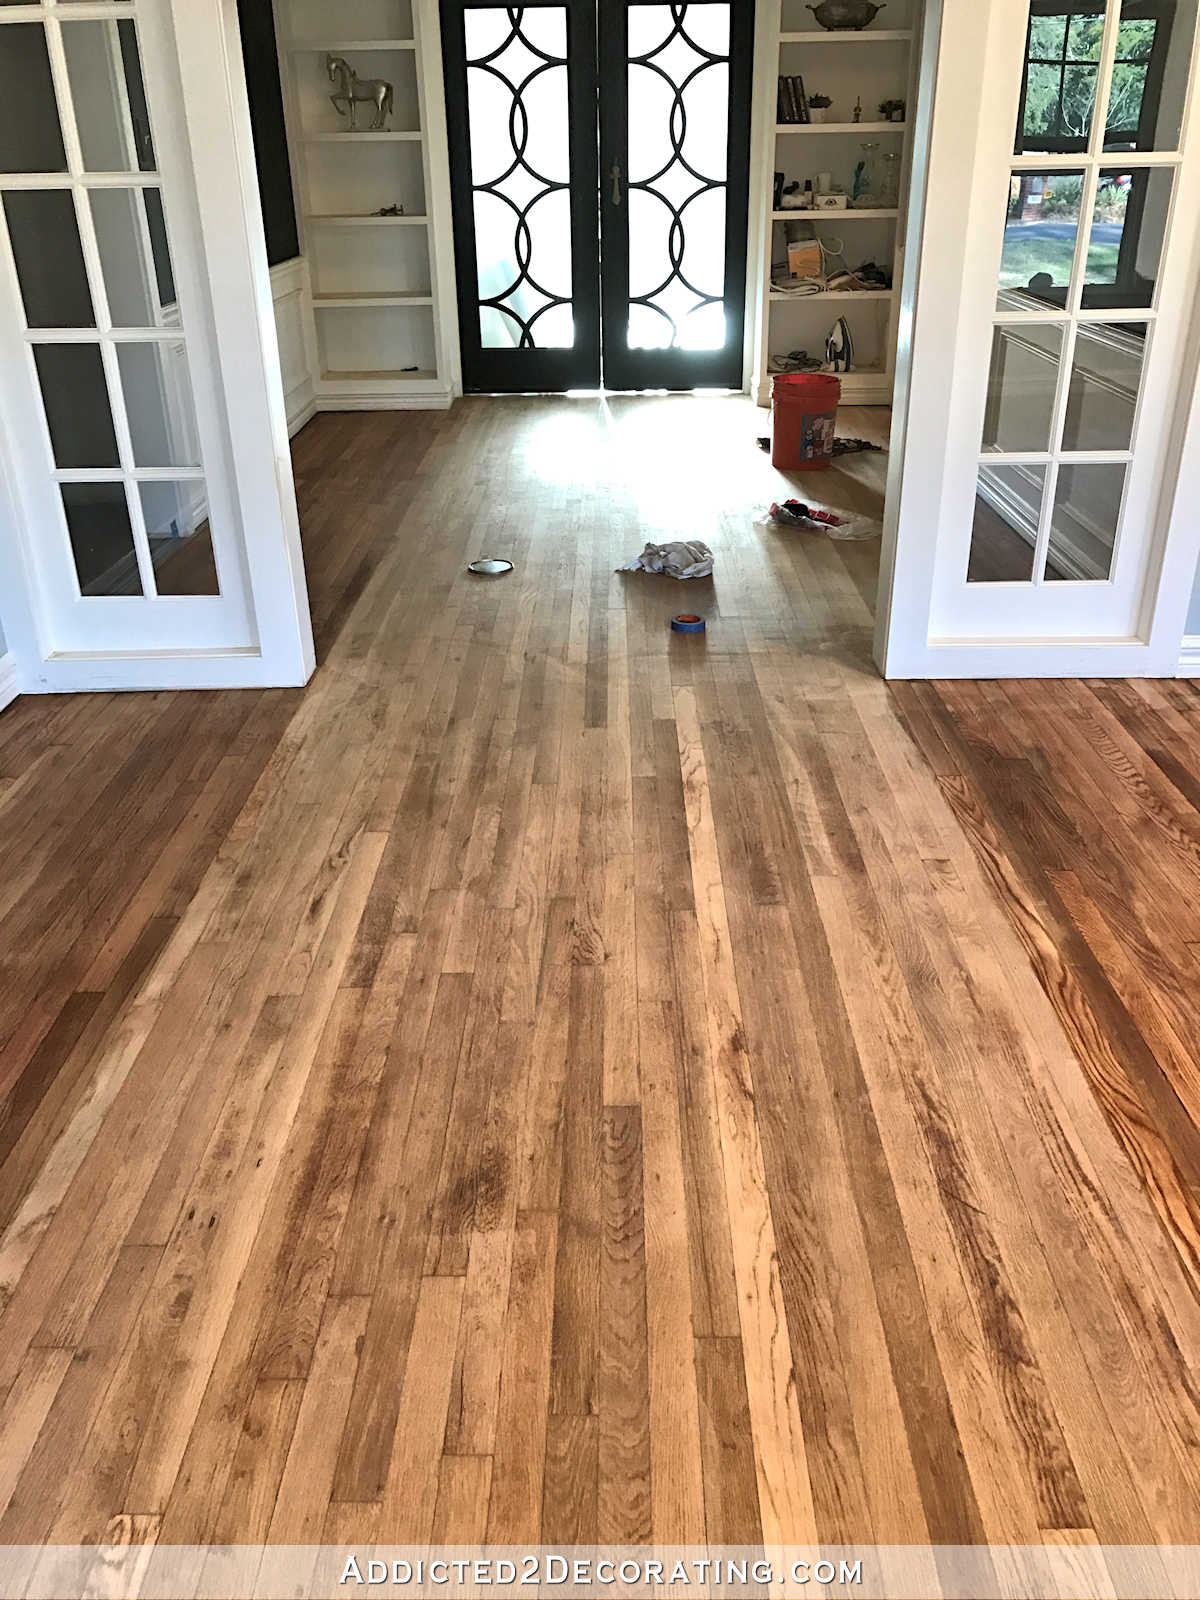 19 Amazing Mahogany Hardwood Flooring Home Depot 2024 free download mahogany hardwood flooring home depot of adventures in staining my red oak hardwood floors products process within staining red oak hardwood floors 5 music room wood conditioner